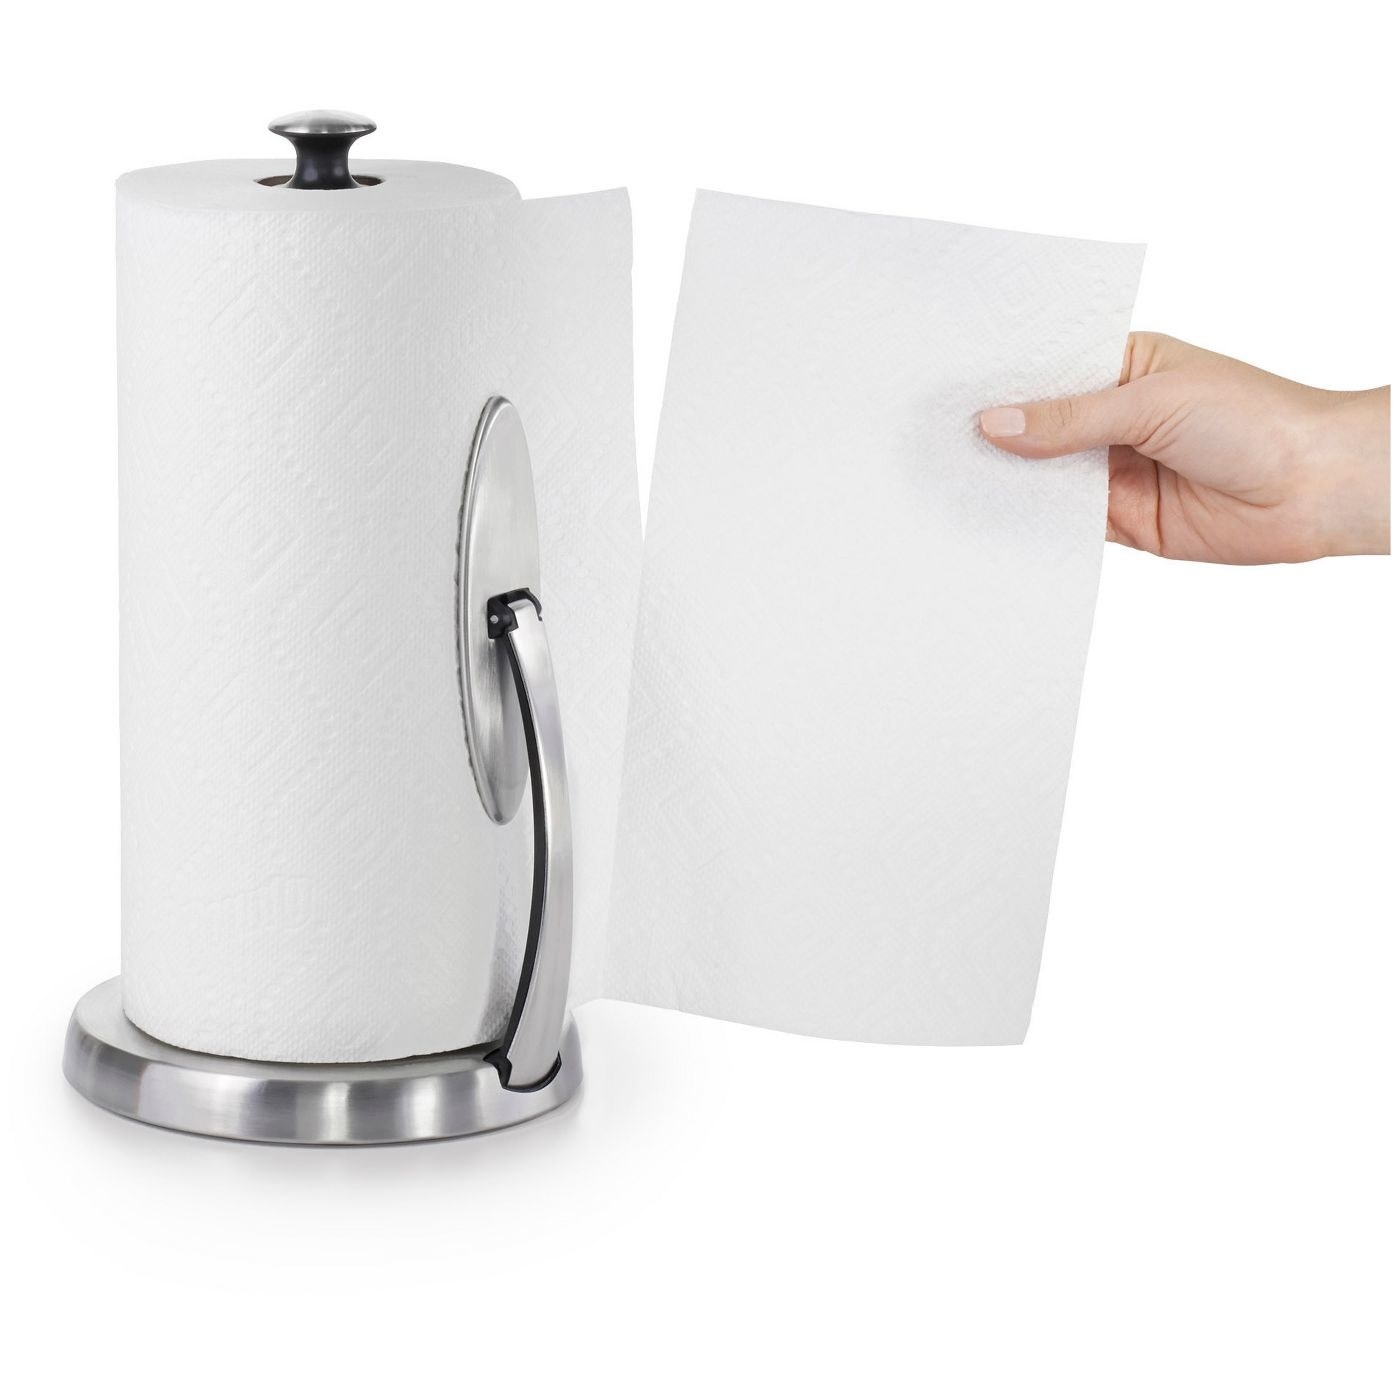 The paper towel holder